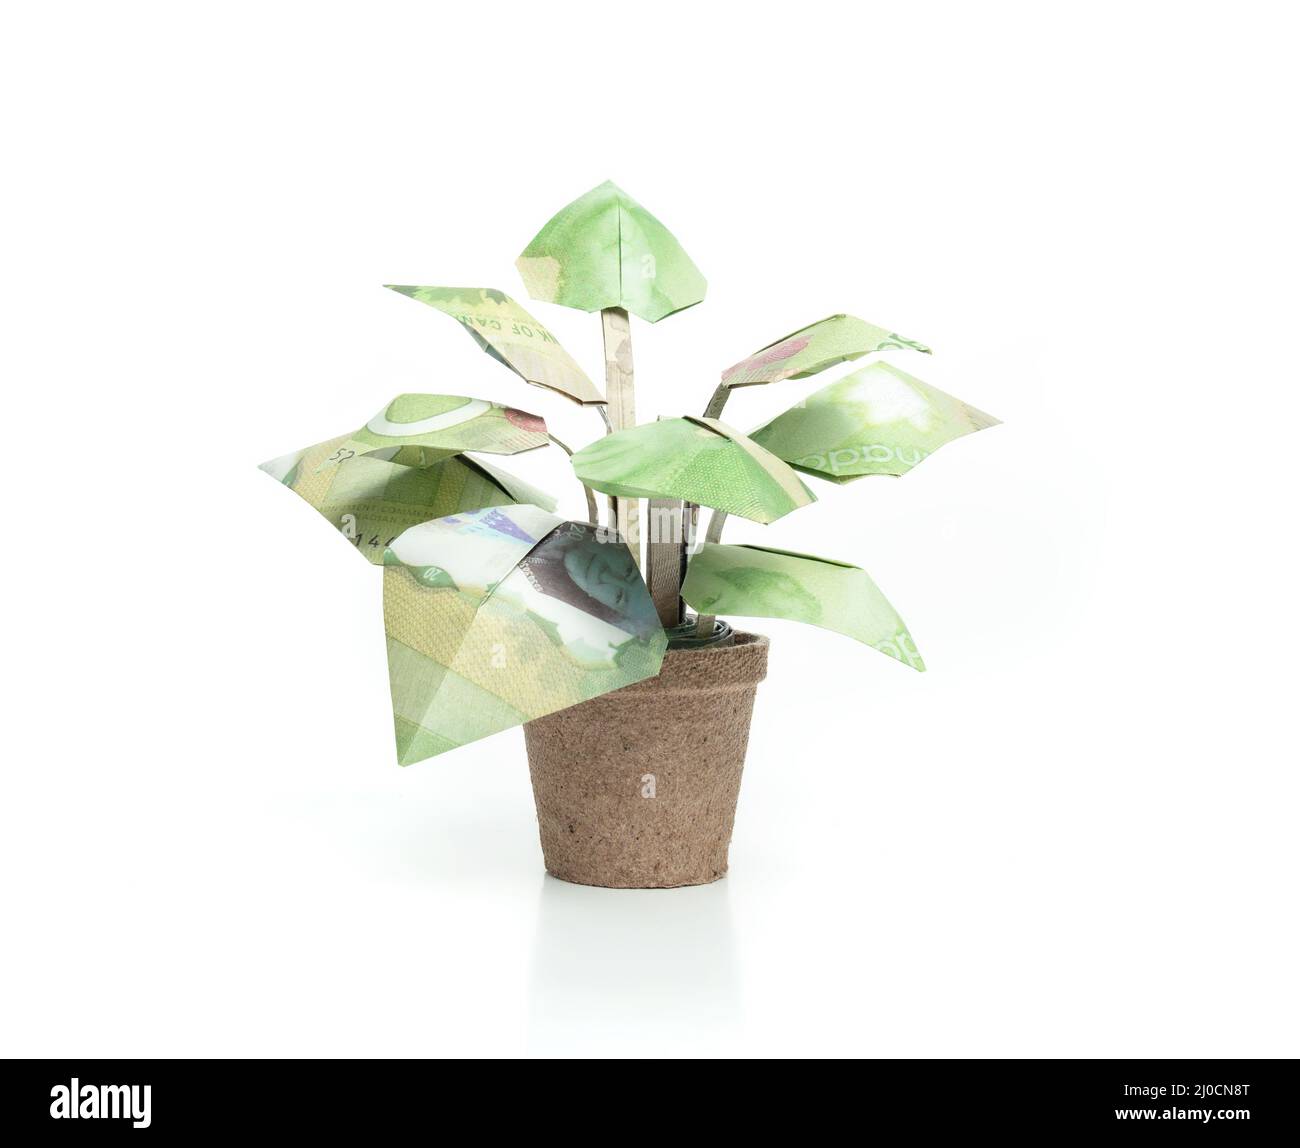 Paper money house plant made out of fake Canadian paper bills. Origami folded paper plant. Financial concept for saving money, growing money or grow m Stock Photo